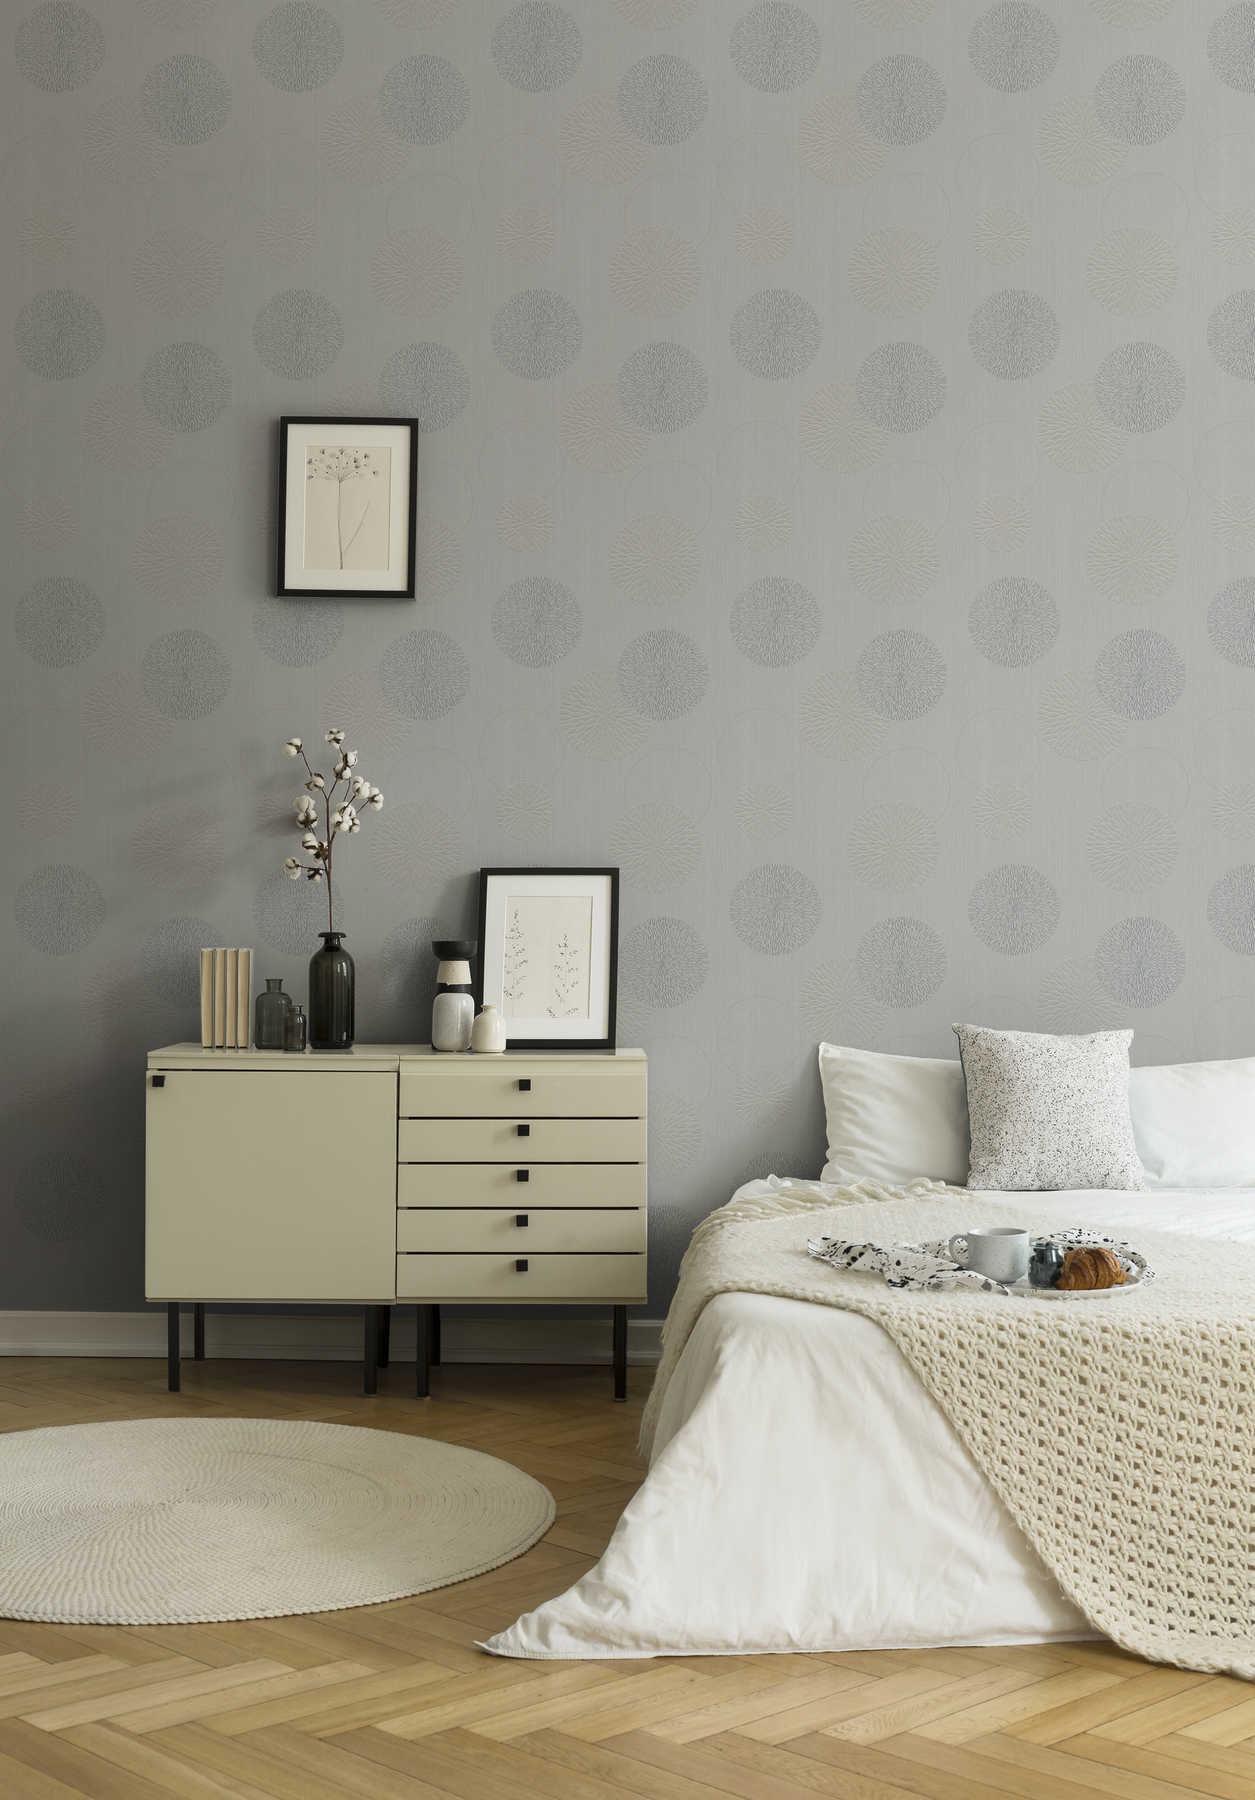             Non-woven wallpaper flowers in abstract design - grey
        